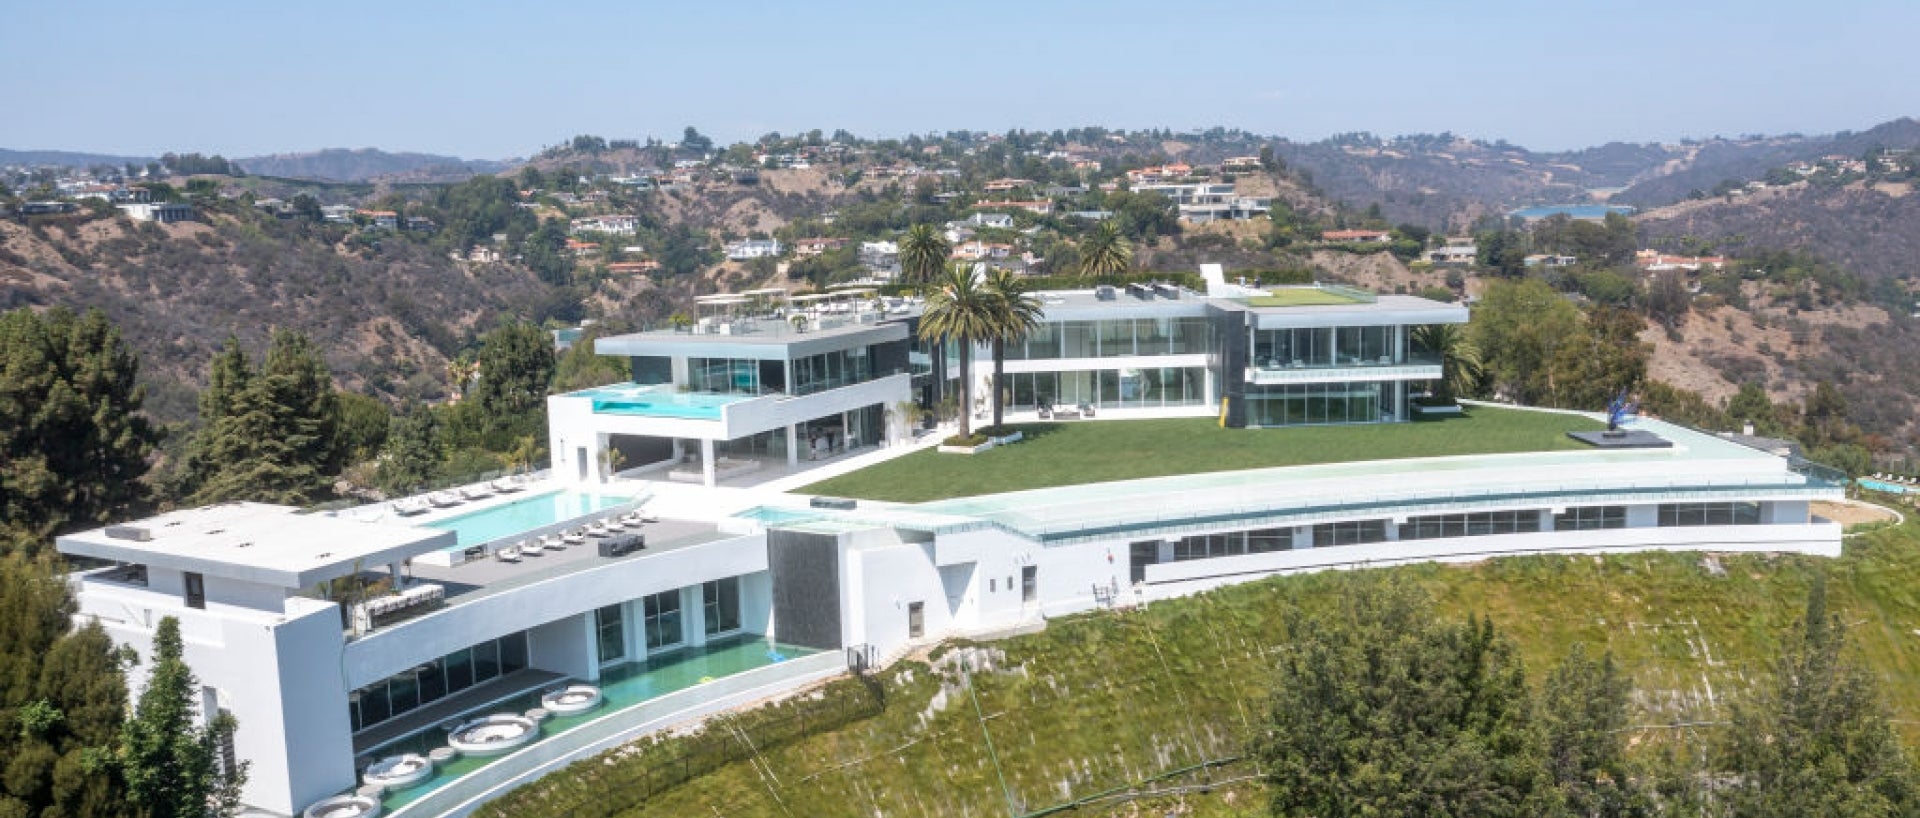 The Los Angeles mansion, nicknamed "The One," is scheduled to hit the auction block in February.